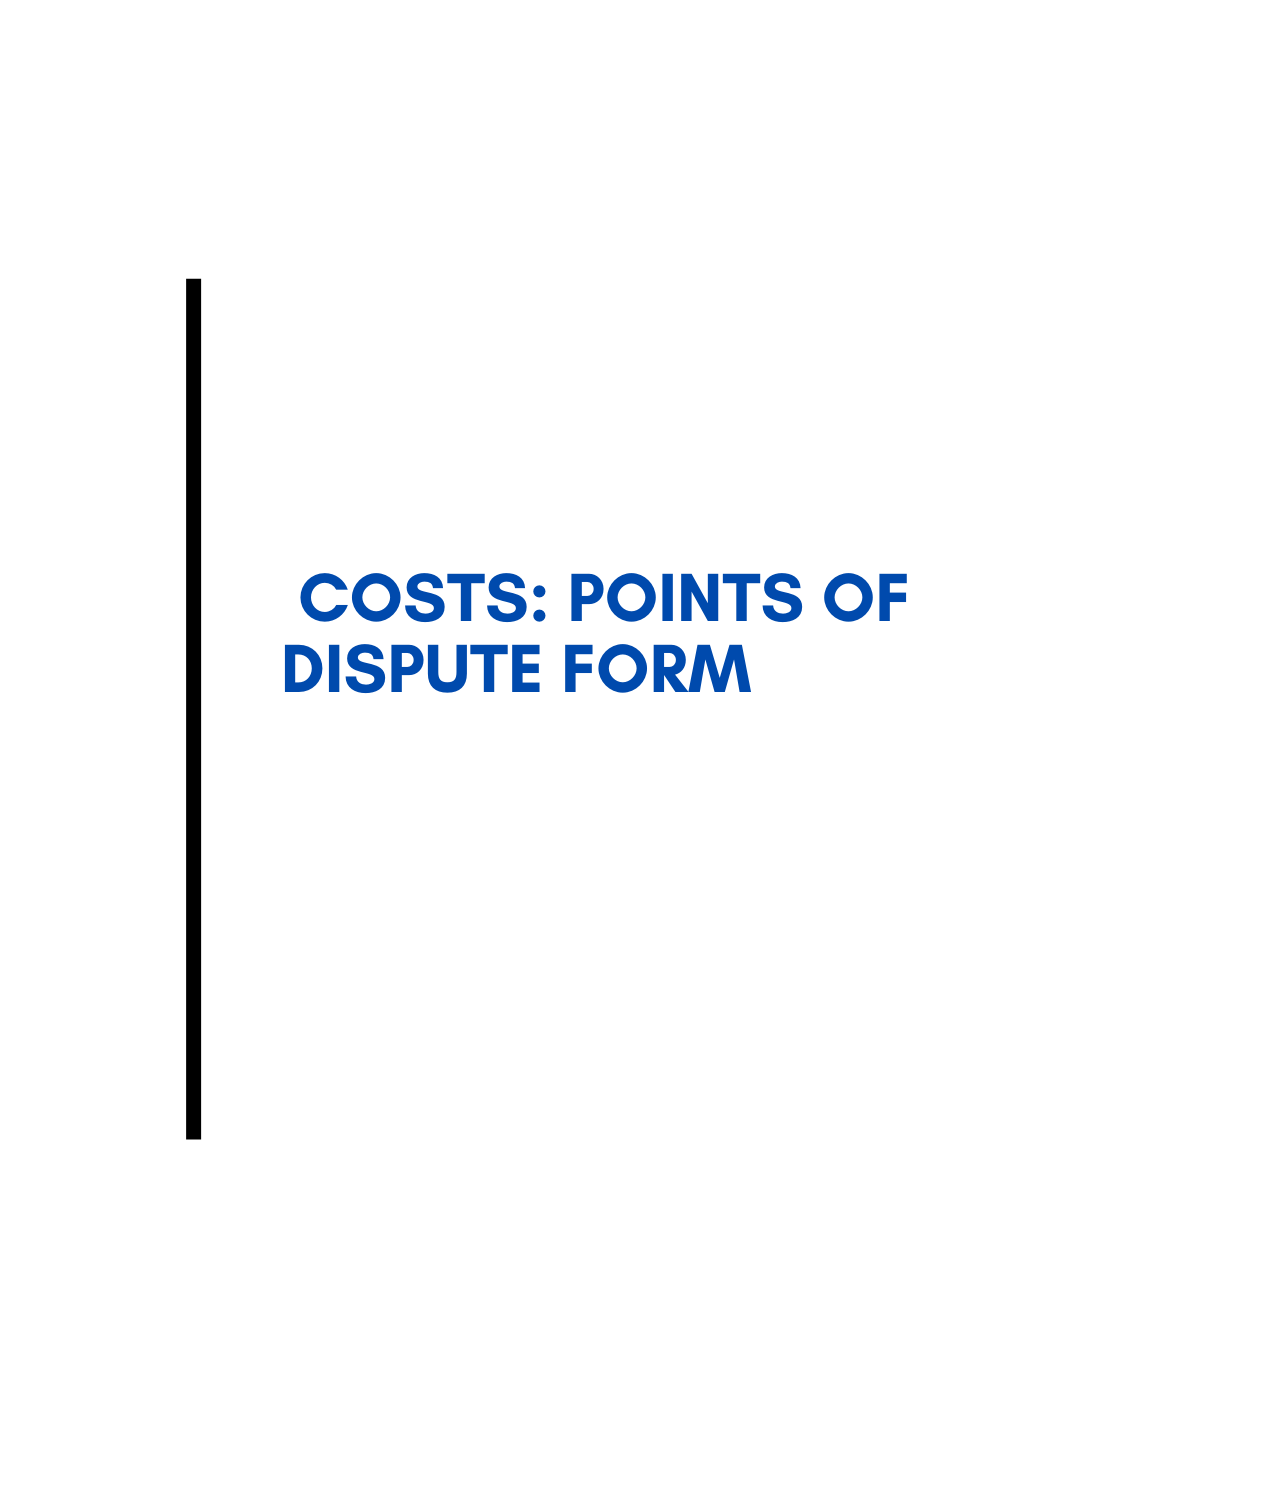 Costs points of dispute form